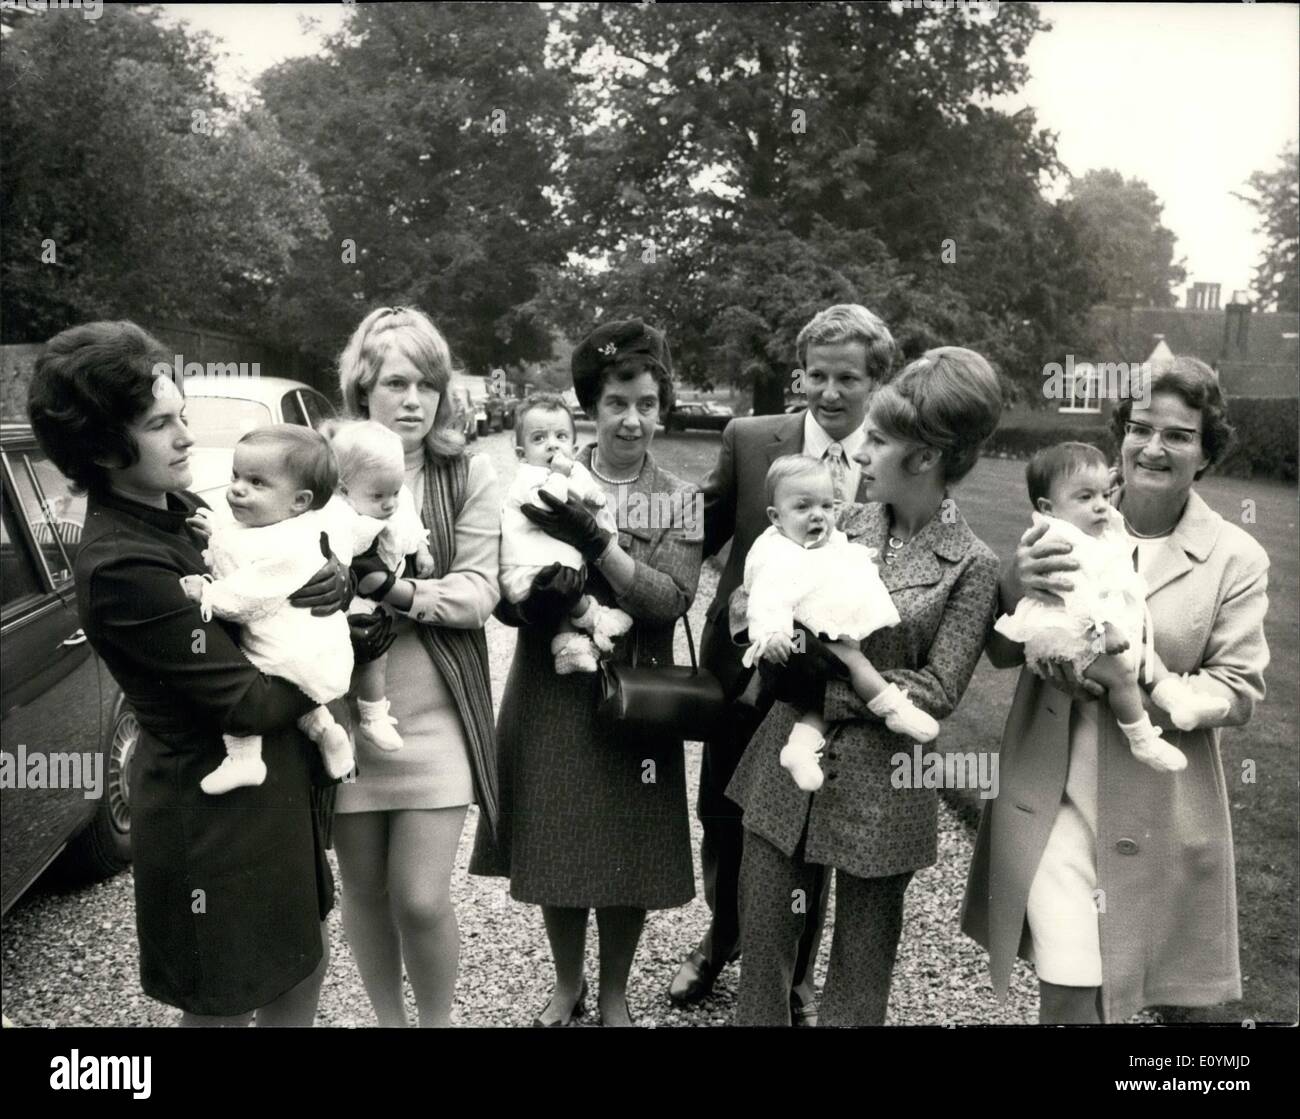 Oct. 10, 1970 - A BIG DAY IN THE LIFE OF BRITAIN'S FAMOUS FIVE BABIES - THE CHRISTENING OF THE LETTS QUINS - It was a big day in the lives of Britain's five famous babies - the LETTS QUINS - who were christened today at St. Michael's Church, Chenies: Bucks. It was at the same church that their 24-year old mother, ROSEMARY LETTS, was christehed, and also the church where she and he 26.year.old husband JOHN, were married four years ago. The babies, SHARON MARIE - CARA DAWN - GARY JOHN - TANYA OD/LE and JOANNE NADINE are now ten months old, PHOTO SHOWS : The LETTS quills arriving at St Michael' Stock Photo